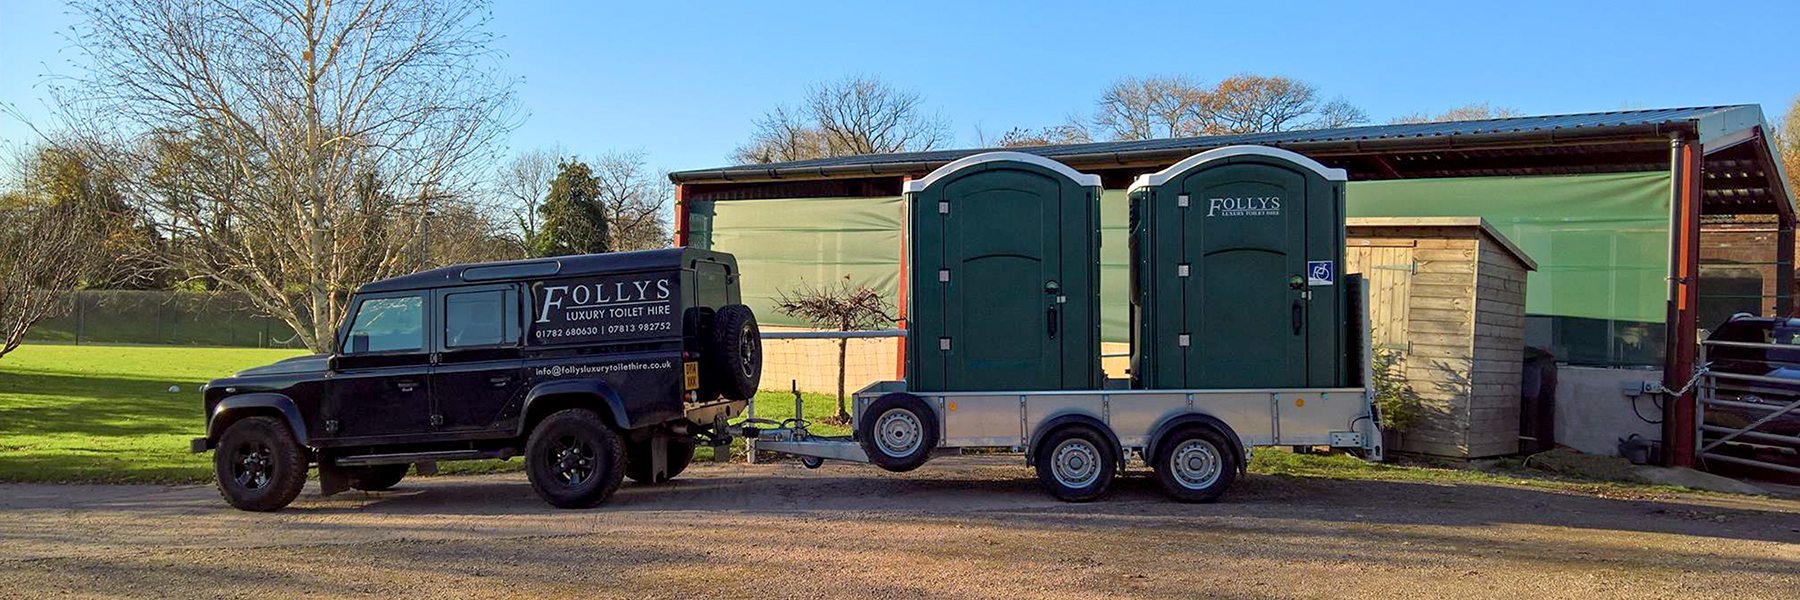 Follys LandRover towing accessible units